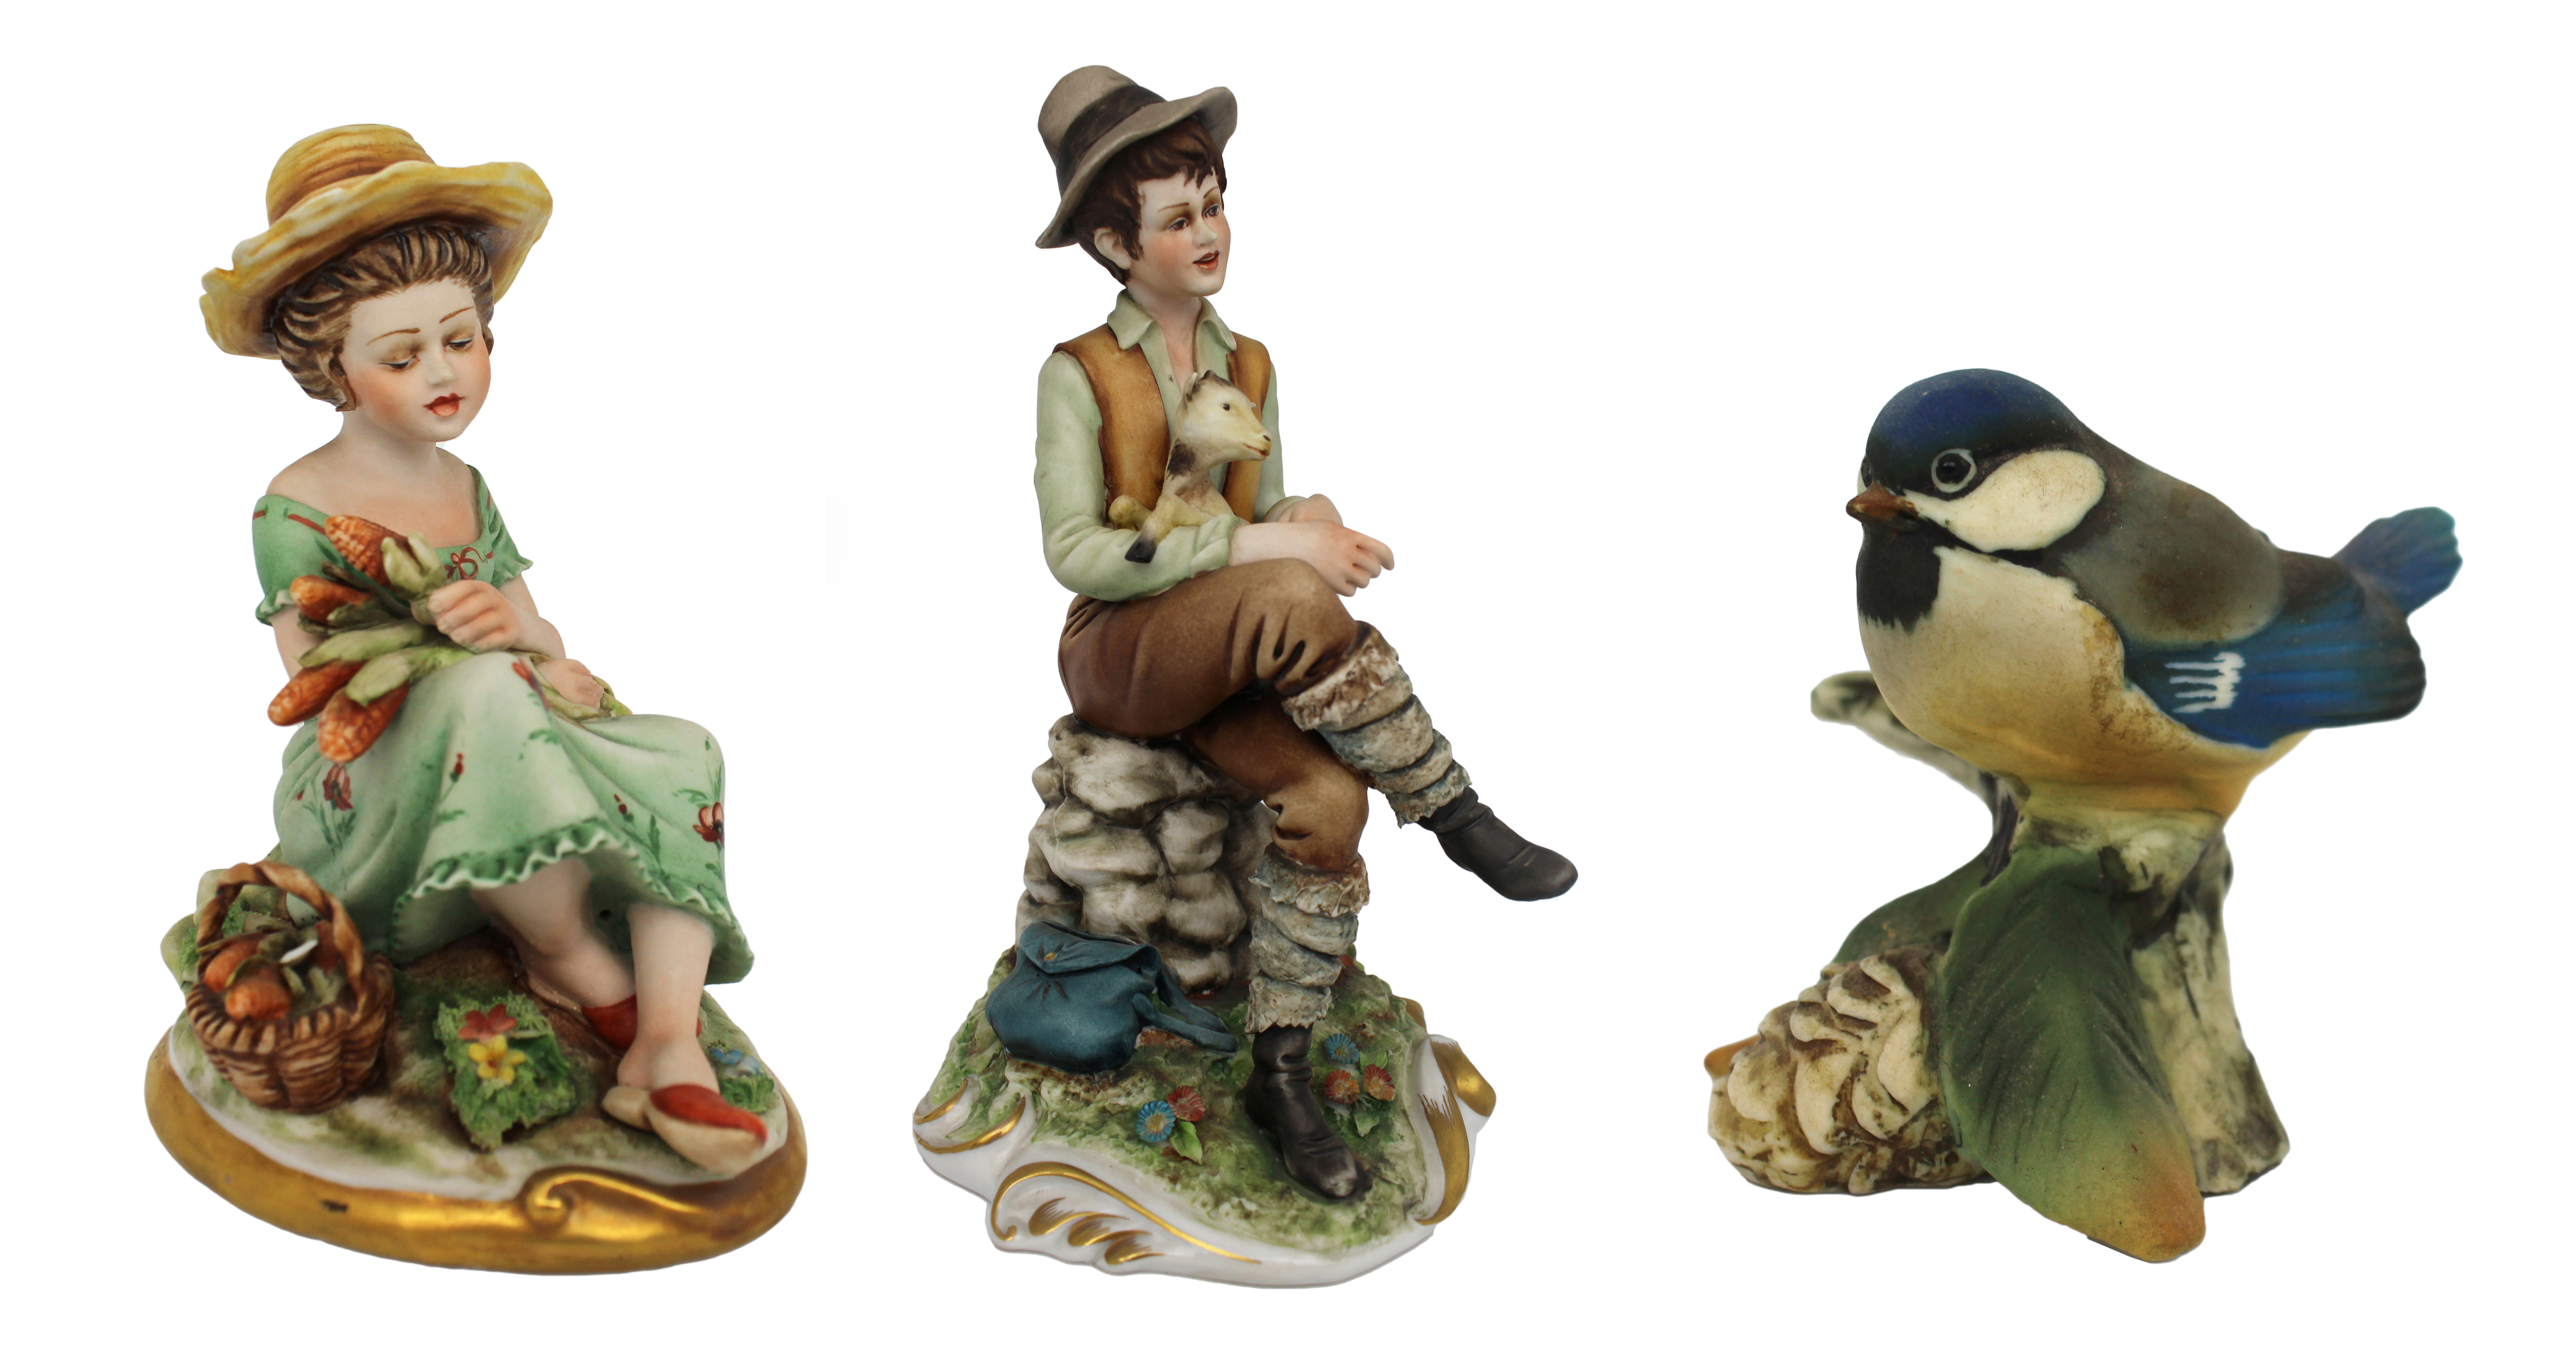 Collection of 3 Vintage Capodimonte Figurines